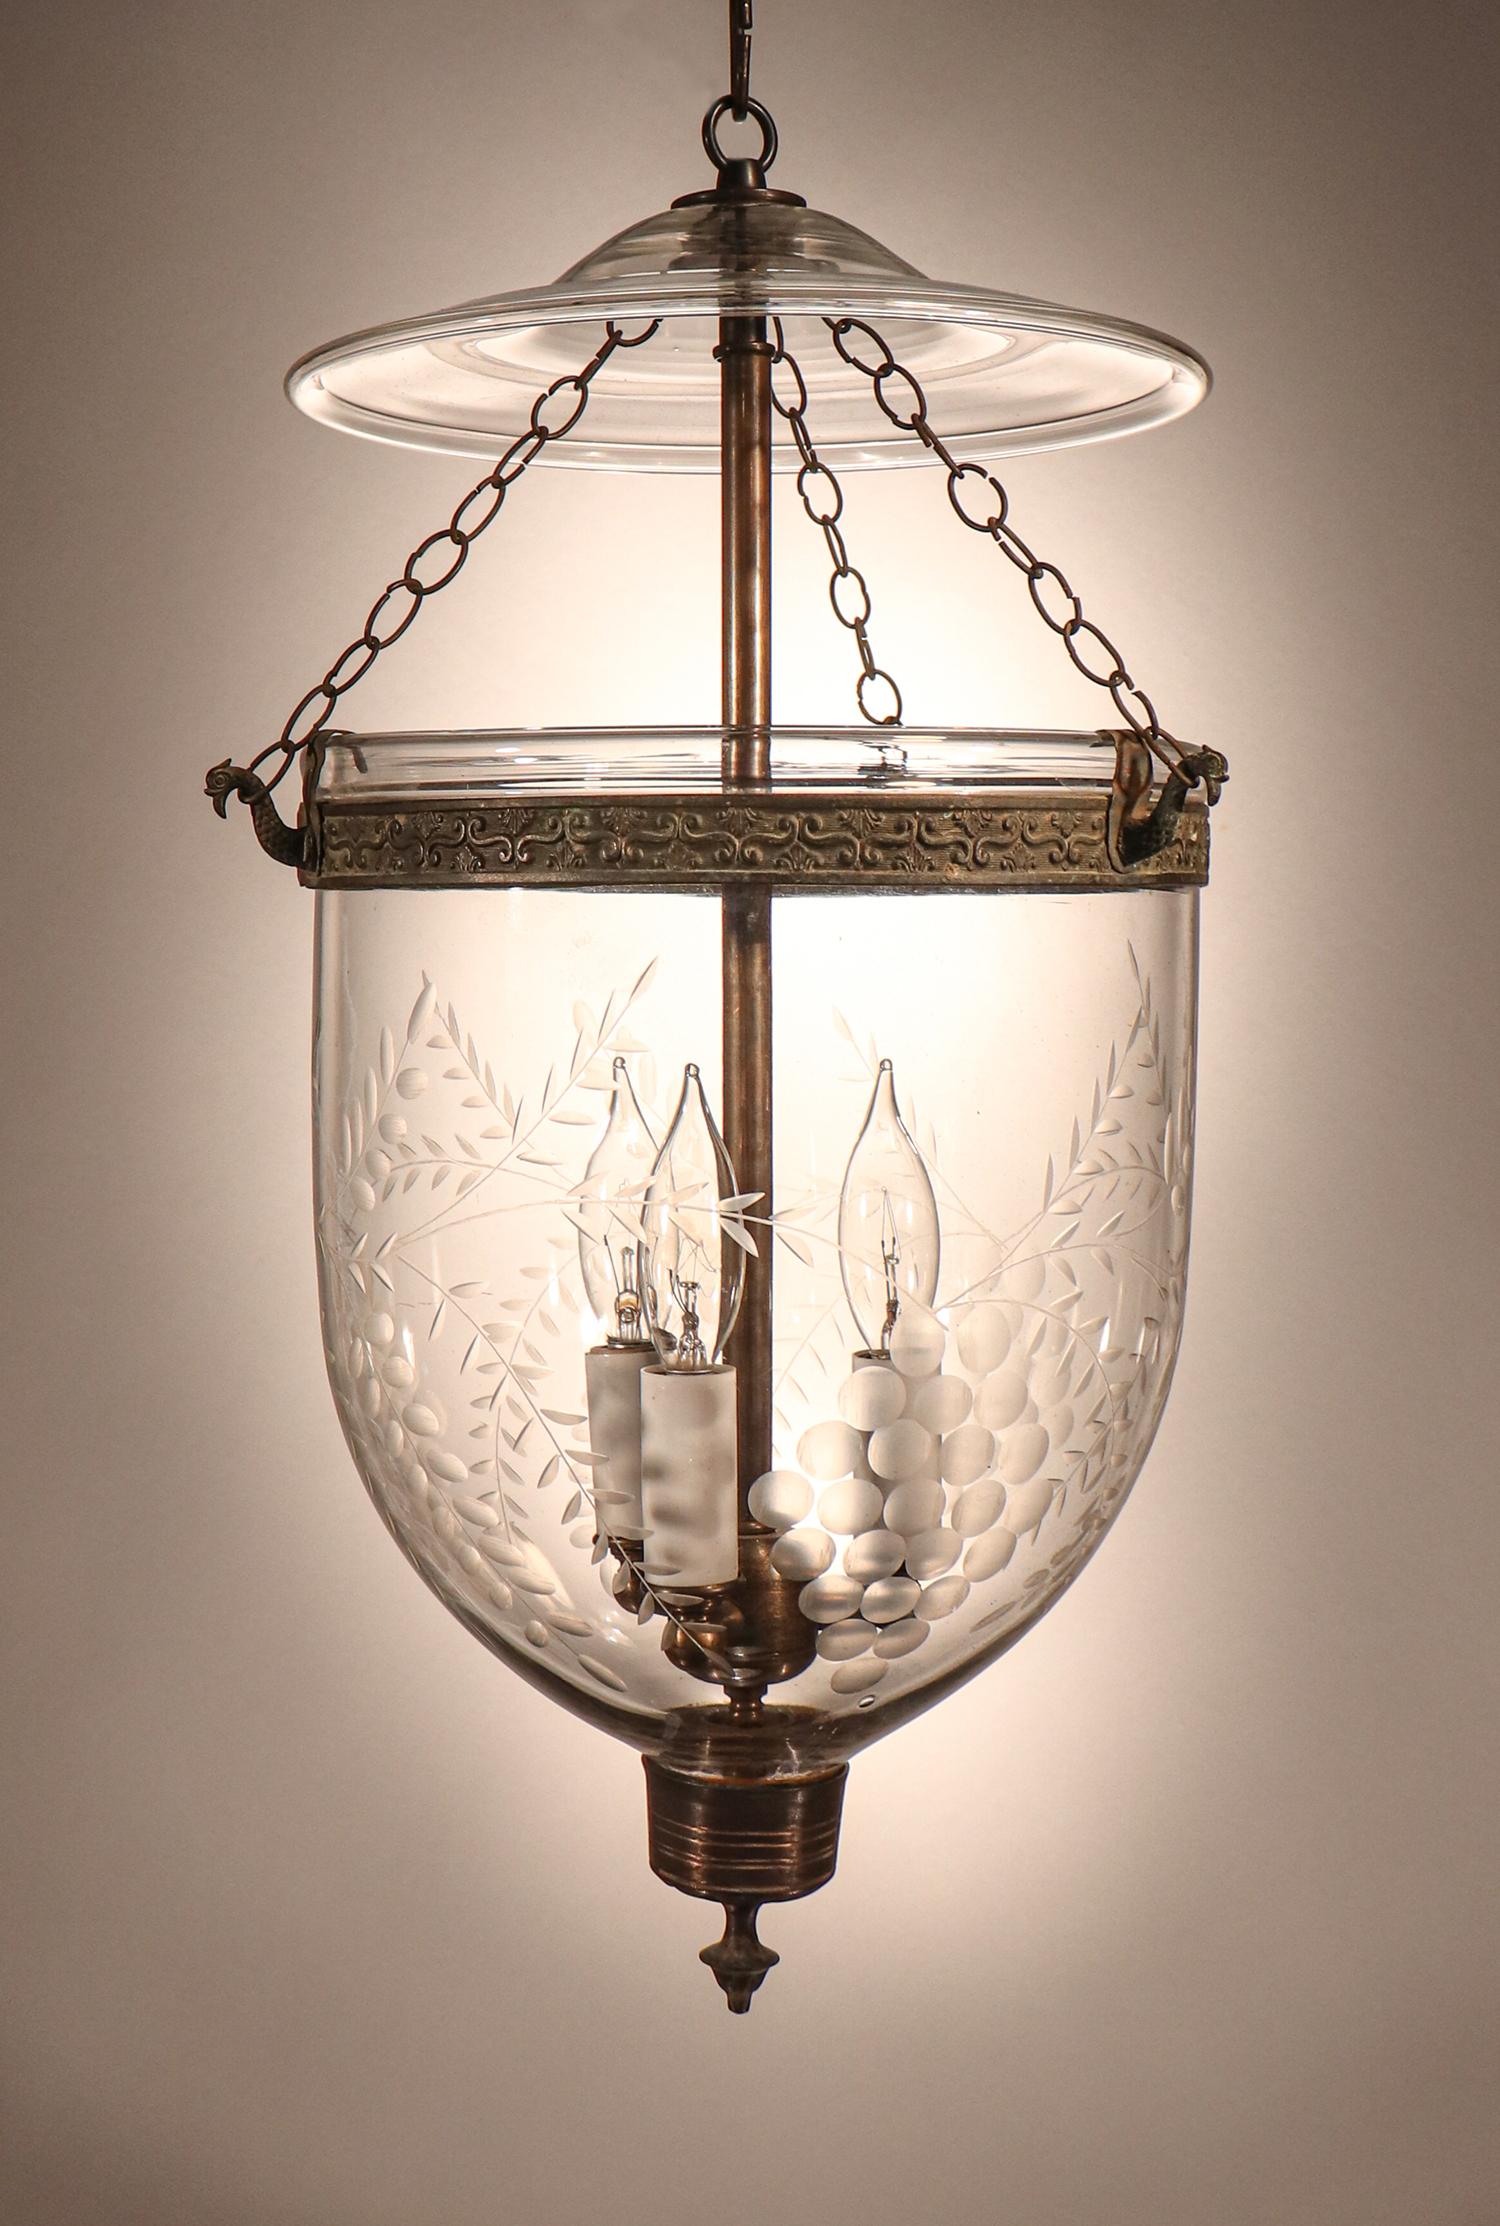 A lovely hand blown glass bell jar lantern from England with an etched grape motif. This circa 1870 lantern features its original embossed brass band, strands of chain, and smoke bell/lid. The pendant's brass finial, which originally held a candle,